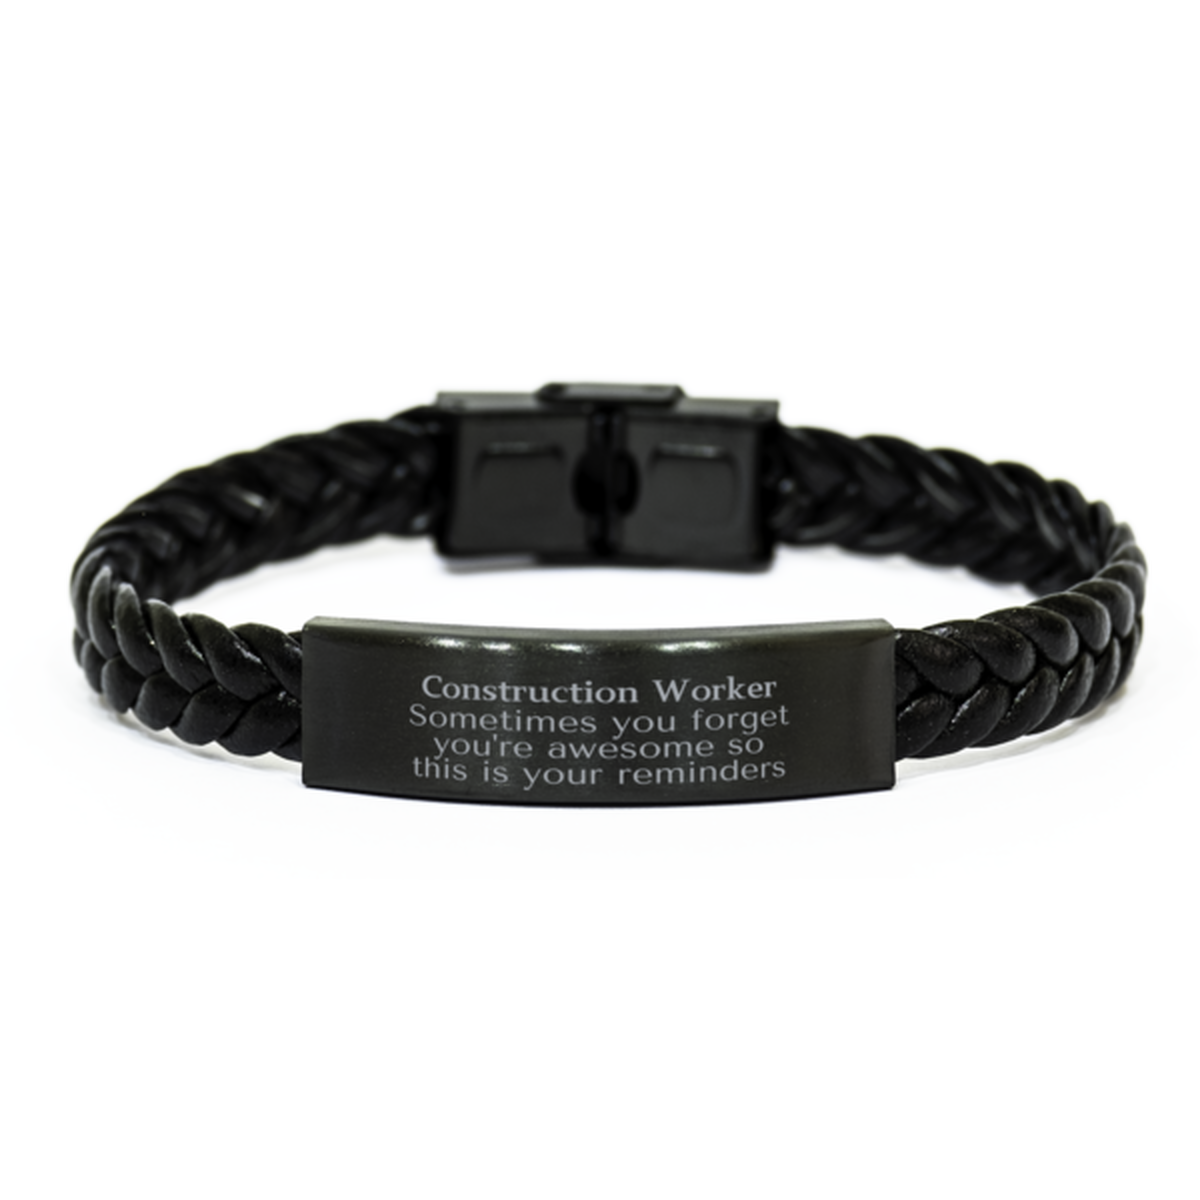 Sentimental Construction Worker Braided Leather Bracelet, Construction Worker Sometimes you forget you're awesome so this is your reminders, Graduation Christmas Birthday Gifts for Construction Worker, Men, Women, Coworkers